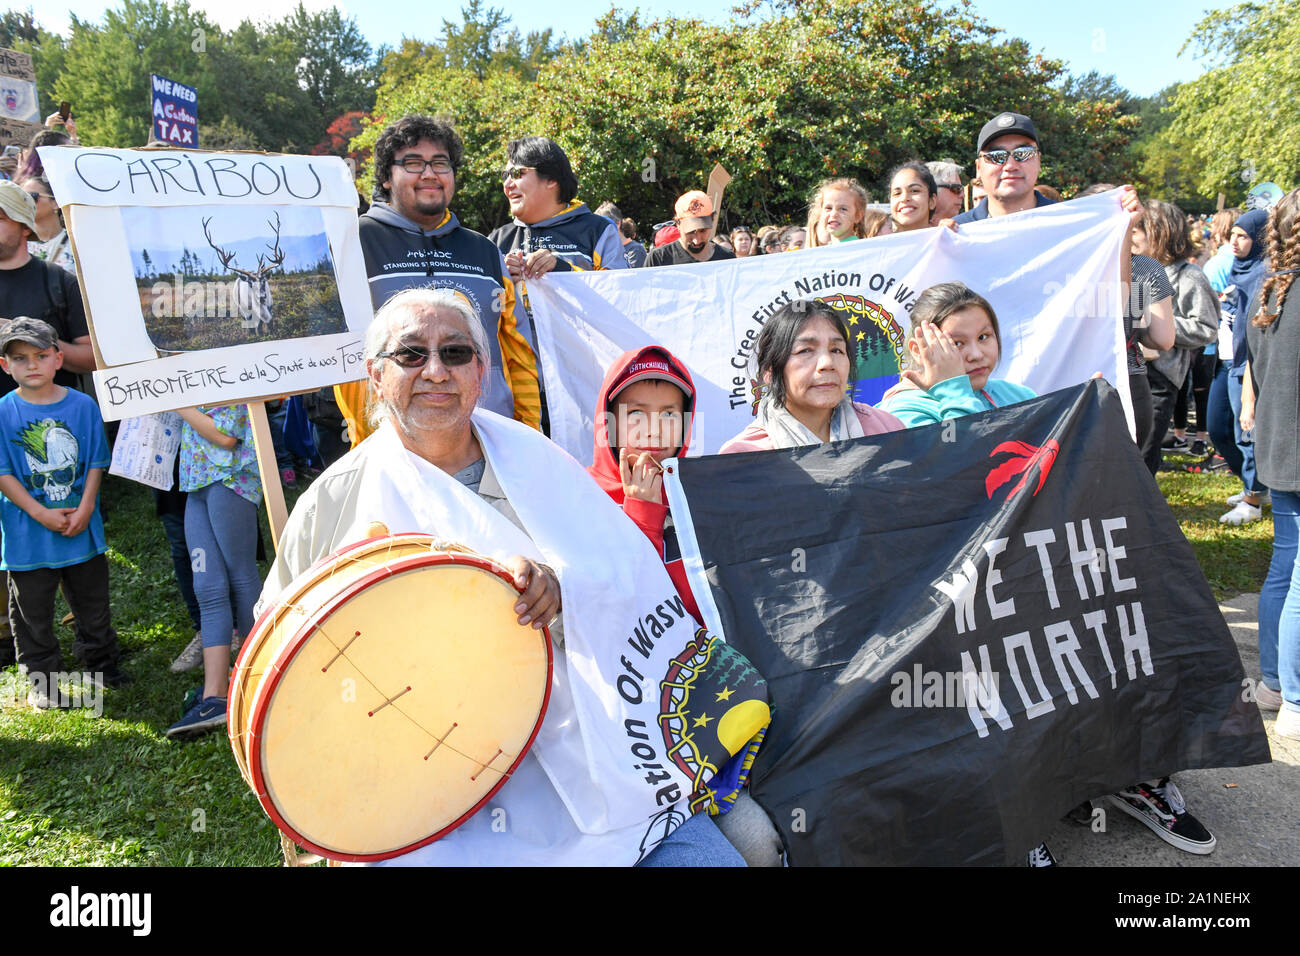 Canadian indigenous people joined the half a million people who went to the Global Climate Strike on September 27, 2019 in Montreal, Canada. They demanded more concrete actions from authorities to counter global warming and climate change. Stock Photo